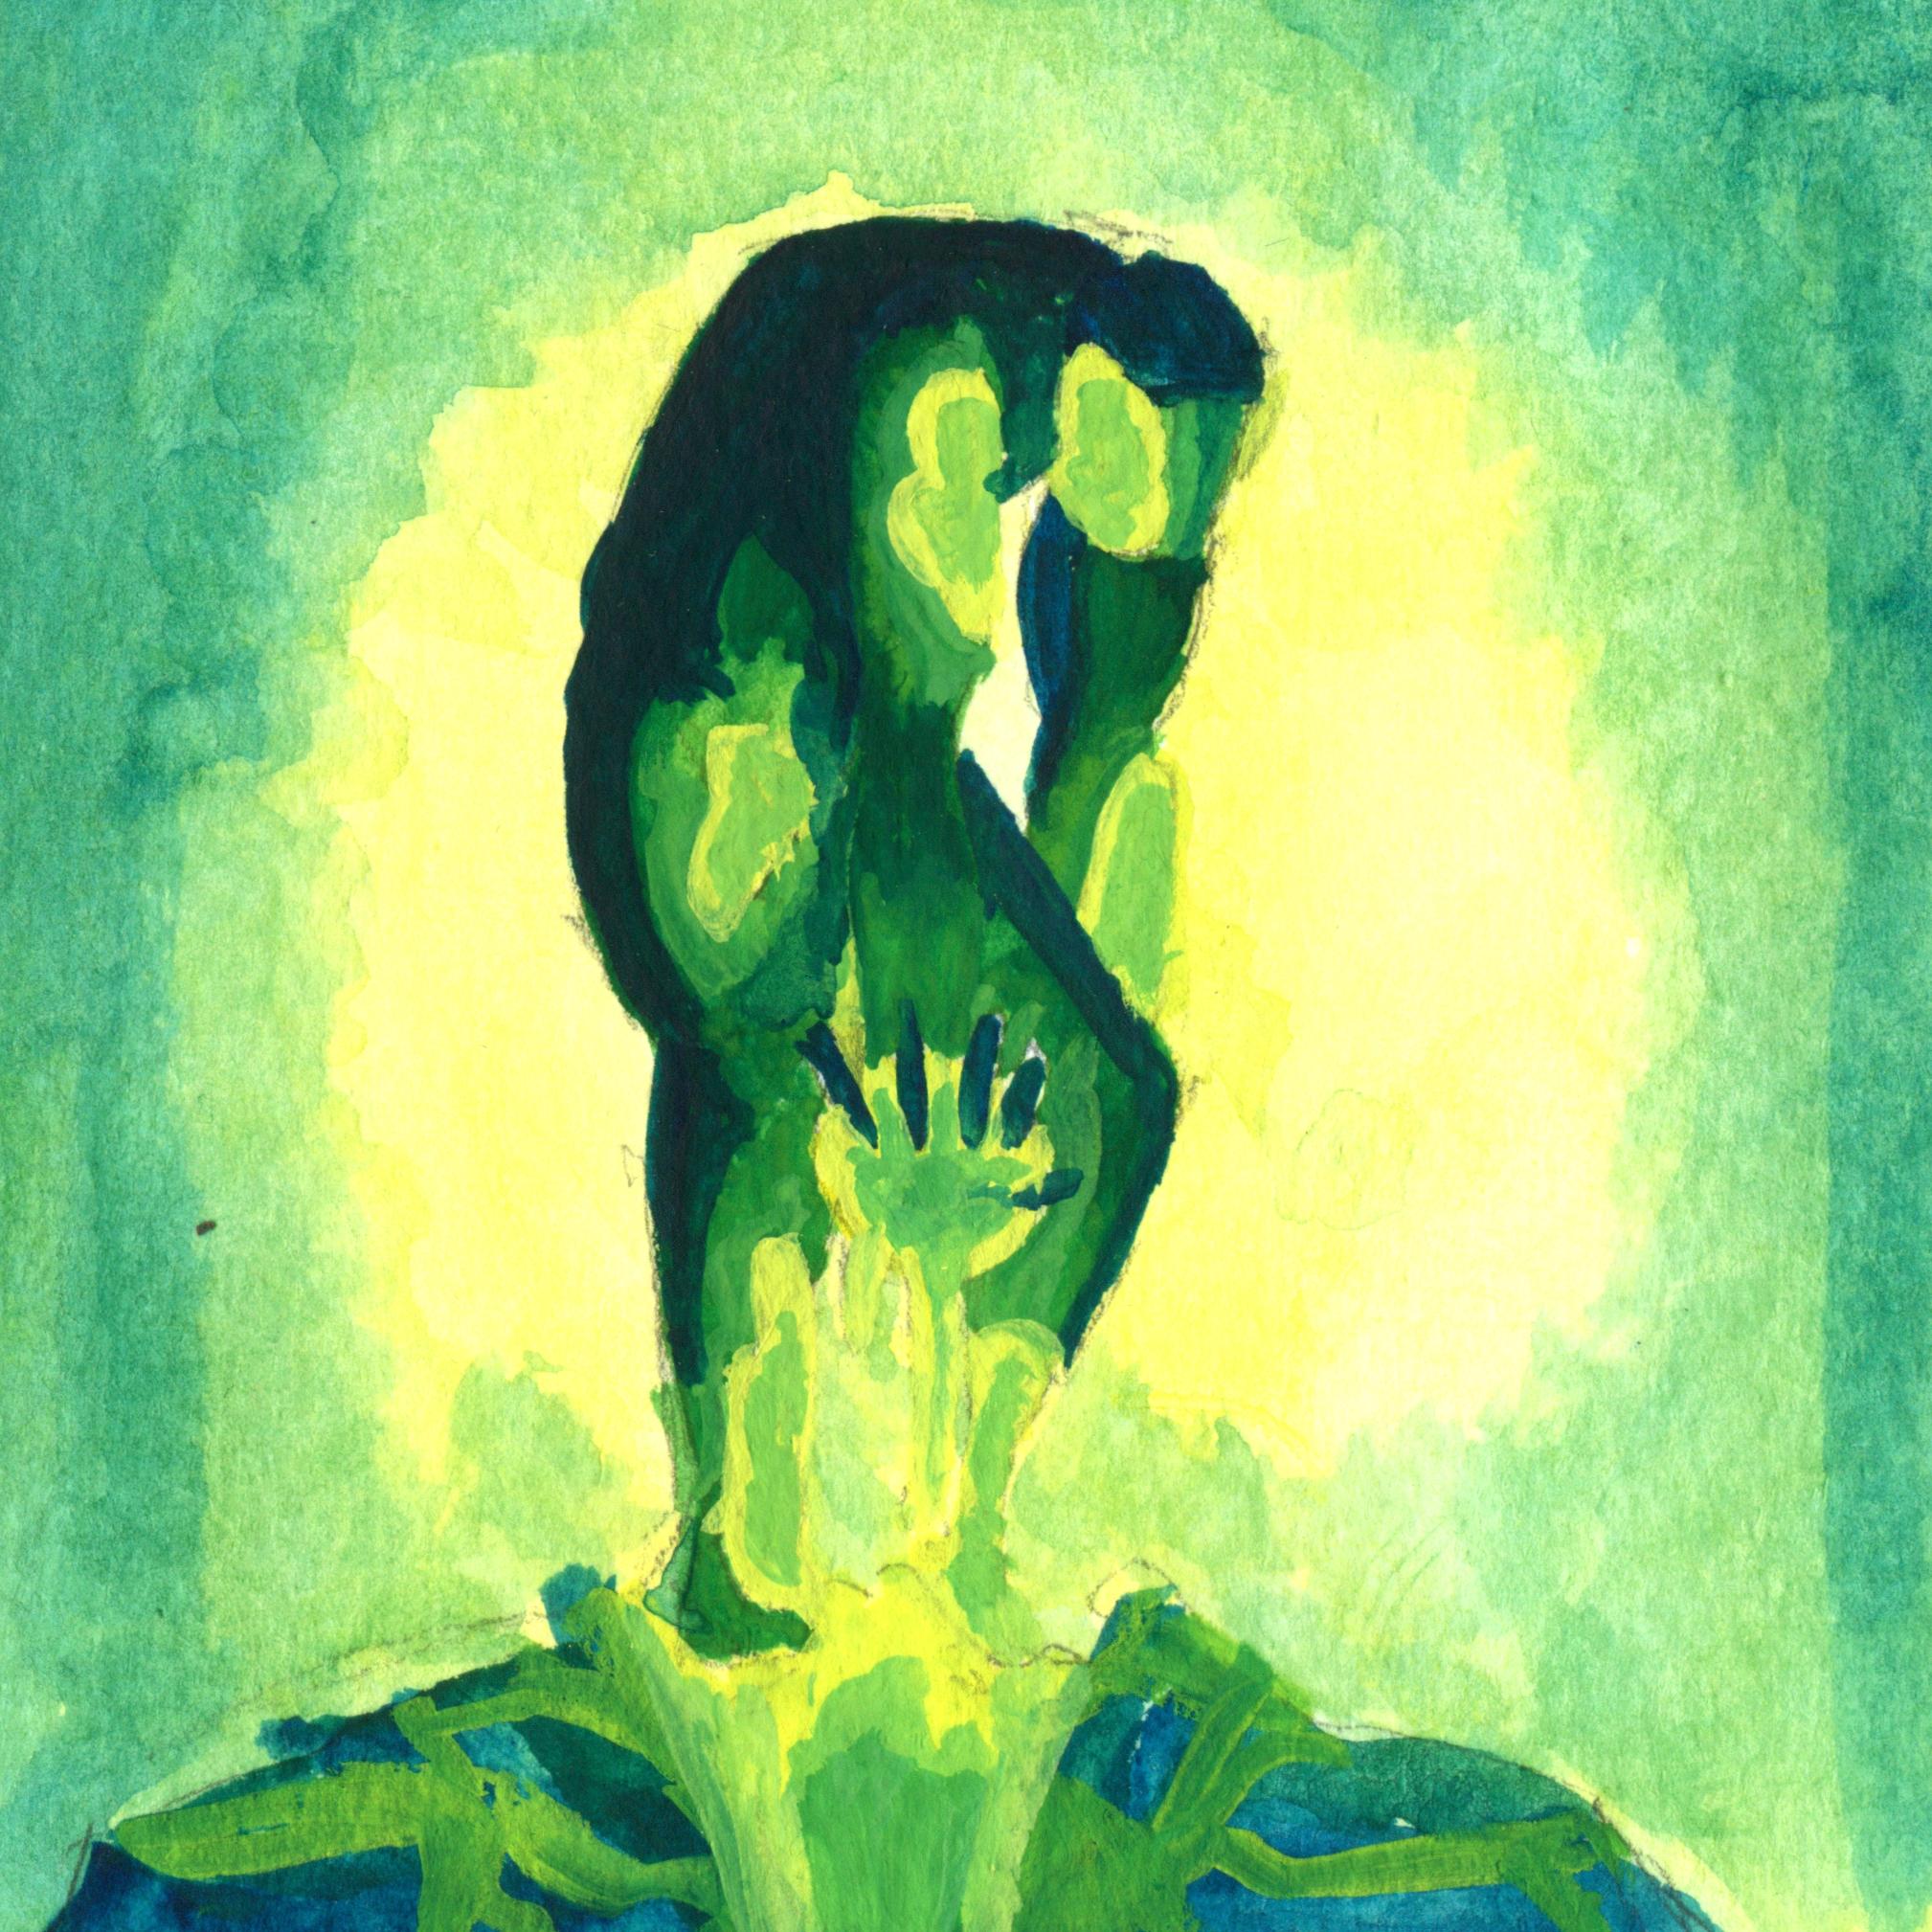 A monochrome painting, in greens and yellows and blues. A person stands crouched over a broken husk. Red fluid pours from its
orifices. She clutches its heart in her hands, covered in blood.